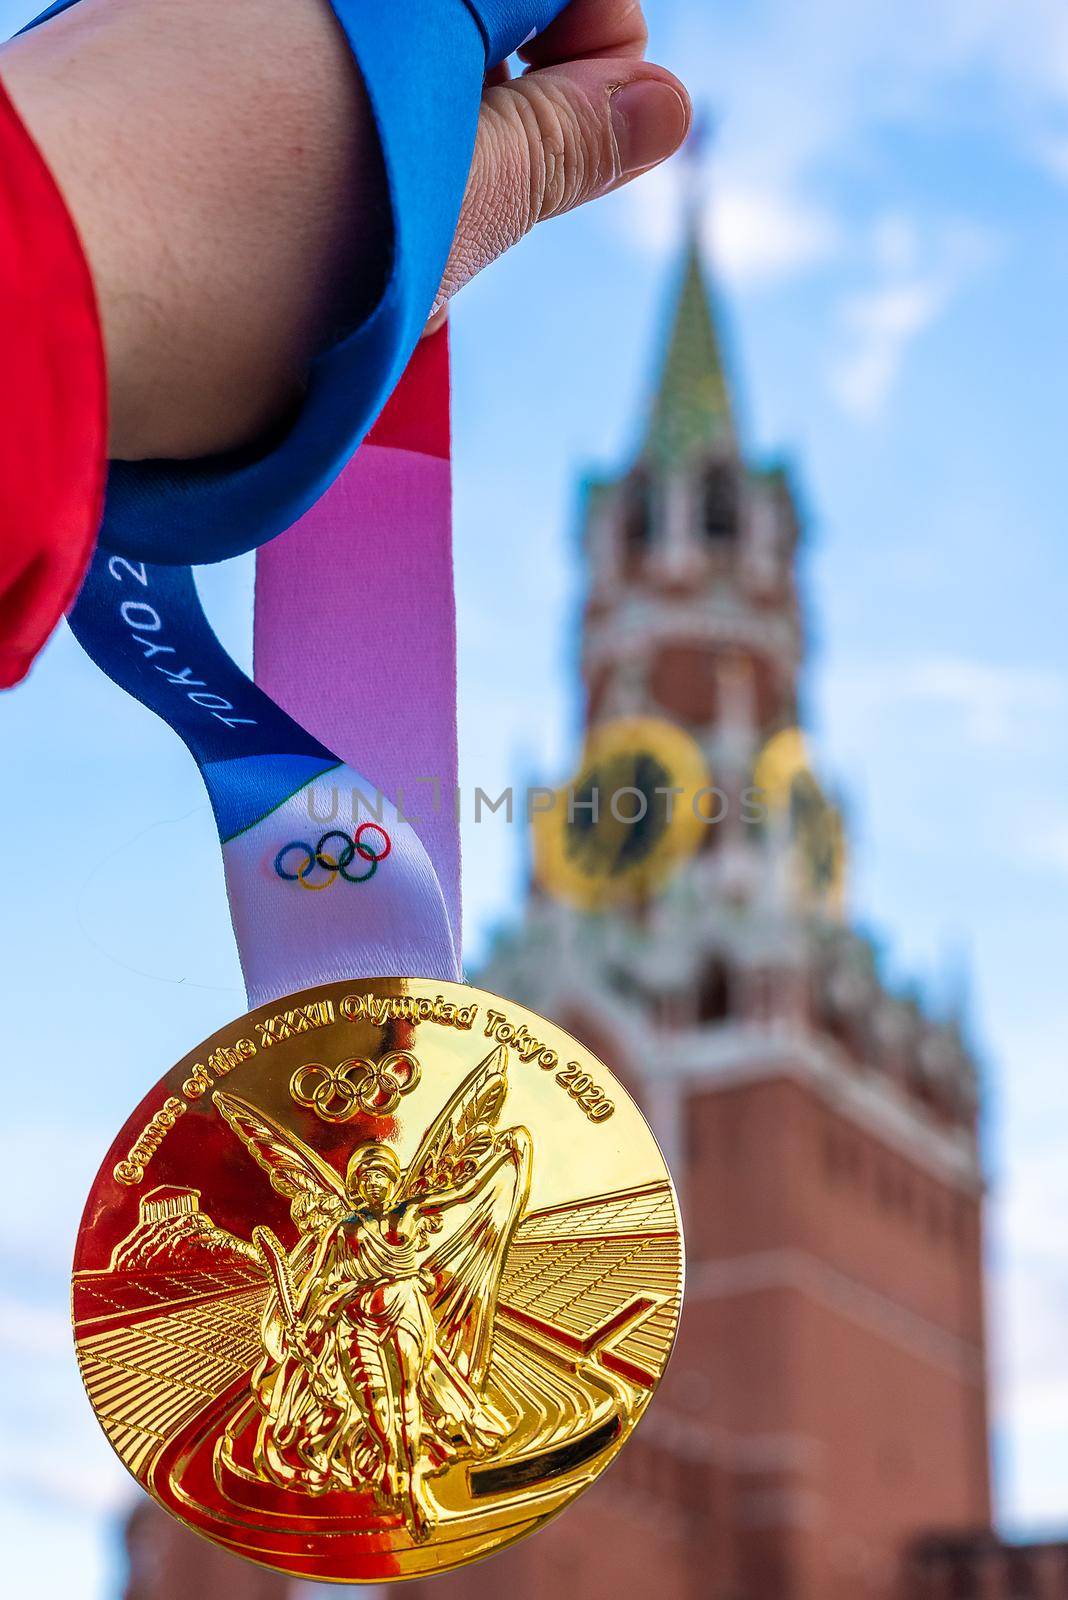 April 25, 2021, Moscow, Russia. Gold medal at the XXXII Summer Olympic Games, which will be held in Tokyo, against the backdrop of the Spasskaya Tower of the Moscow Kremlin.